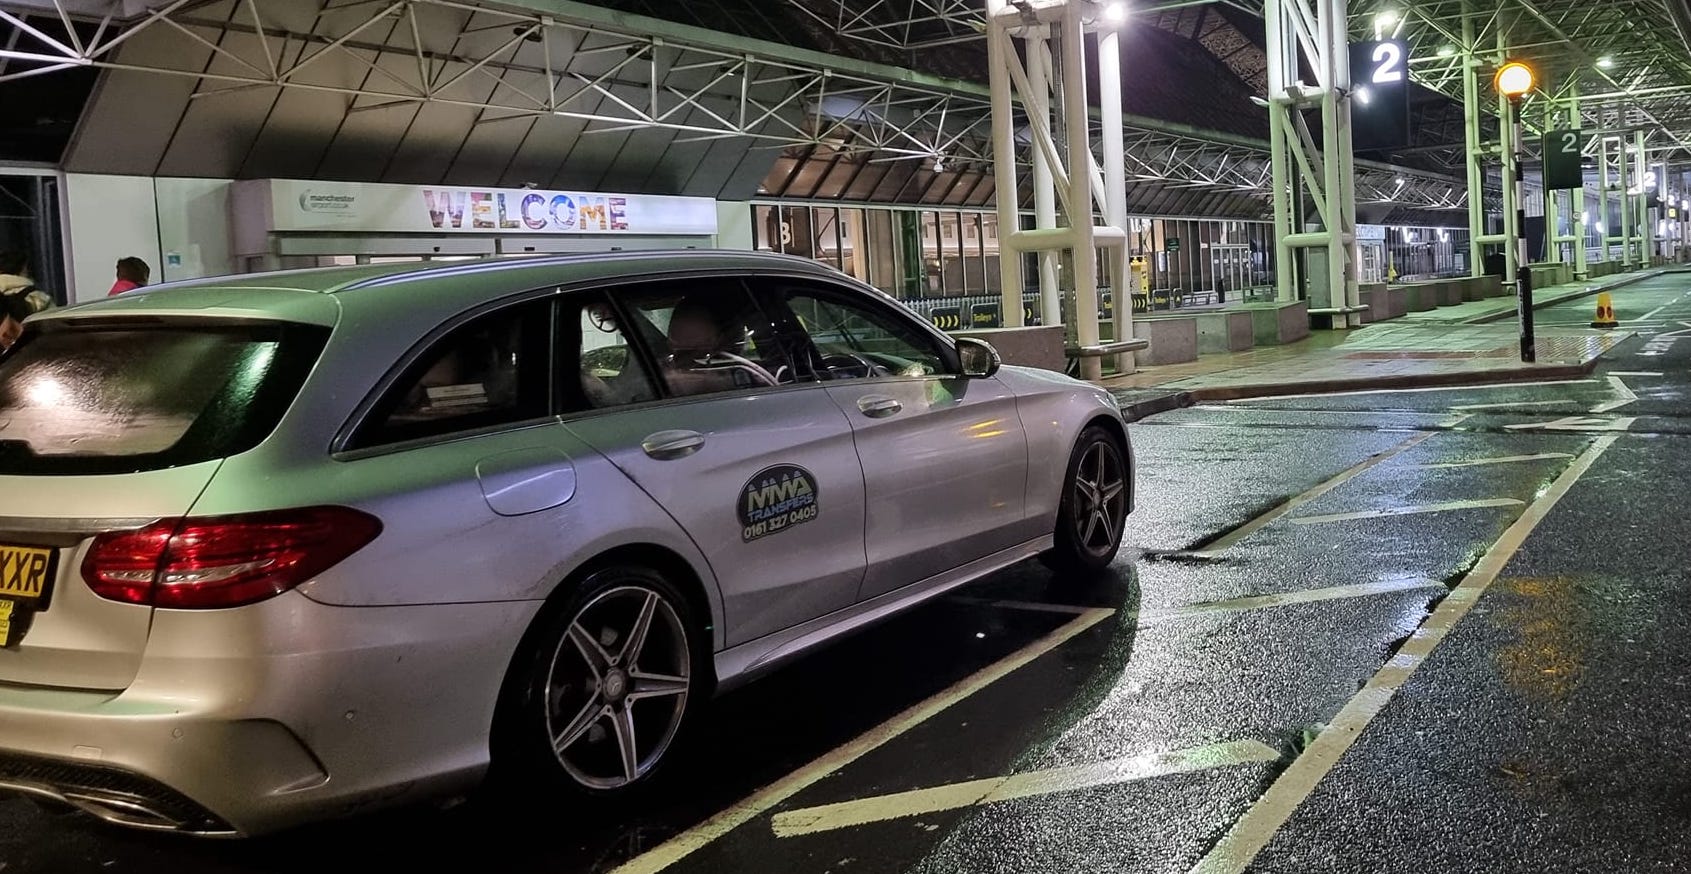 Take a Taxi from Manchester Airport to Shrewsbury with a free Meet and Greet Service